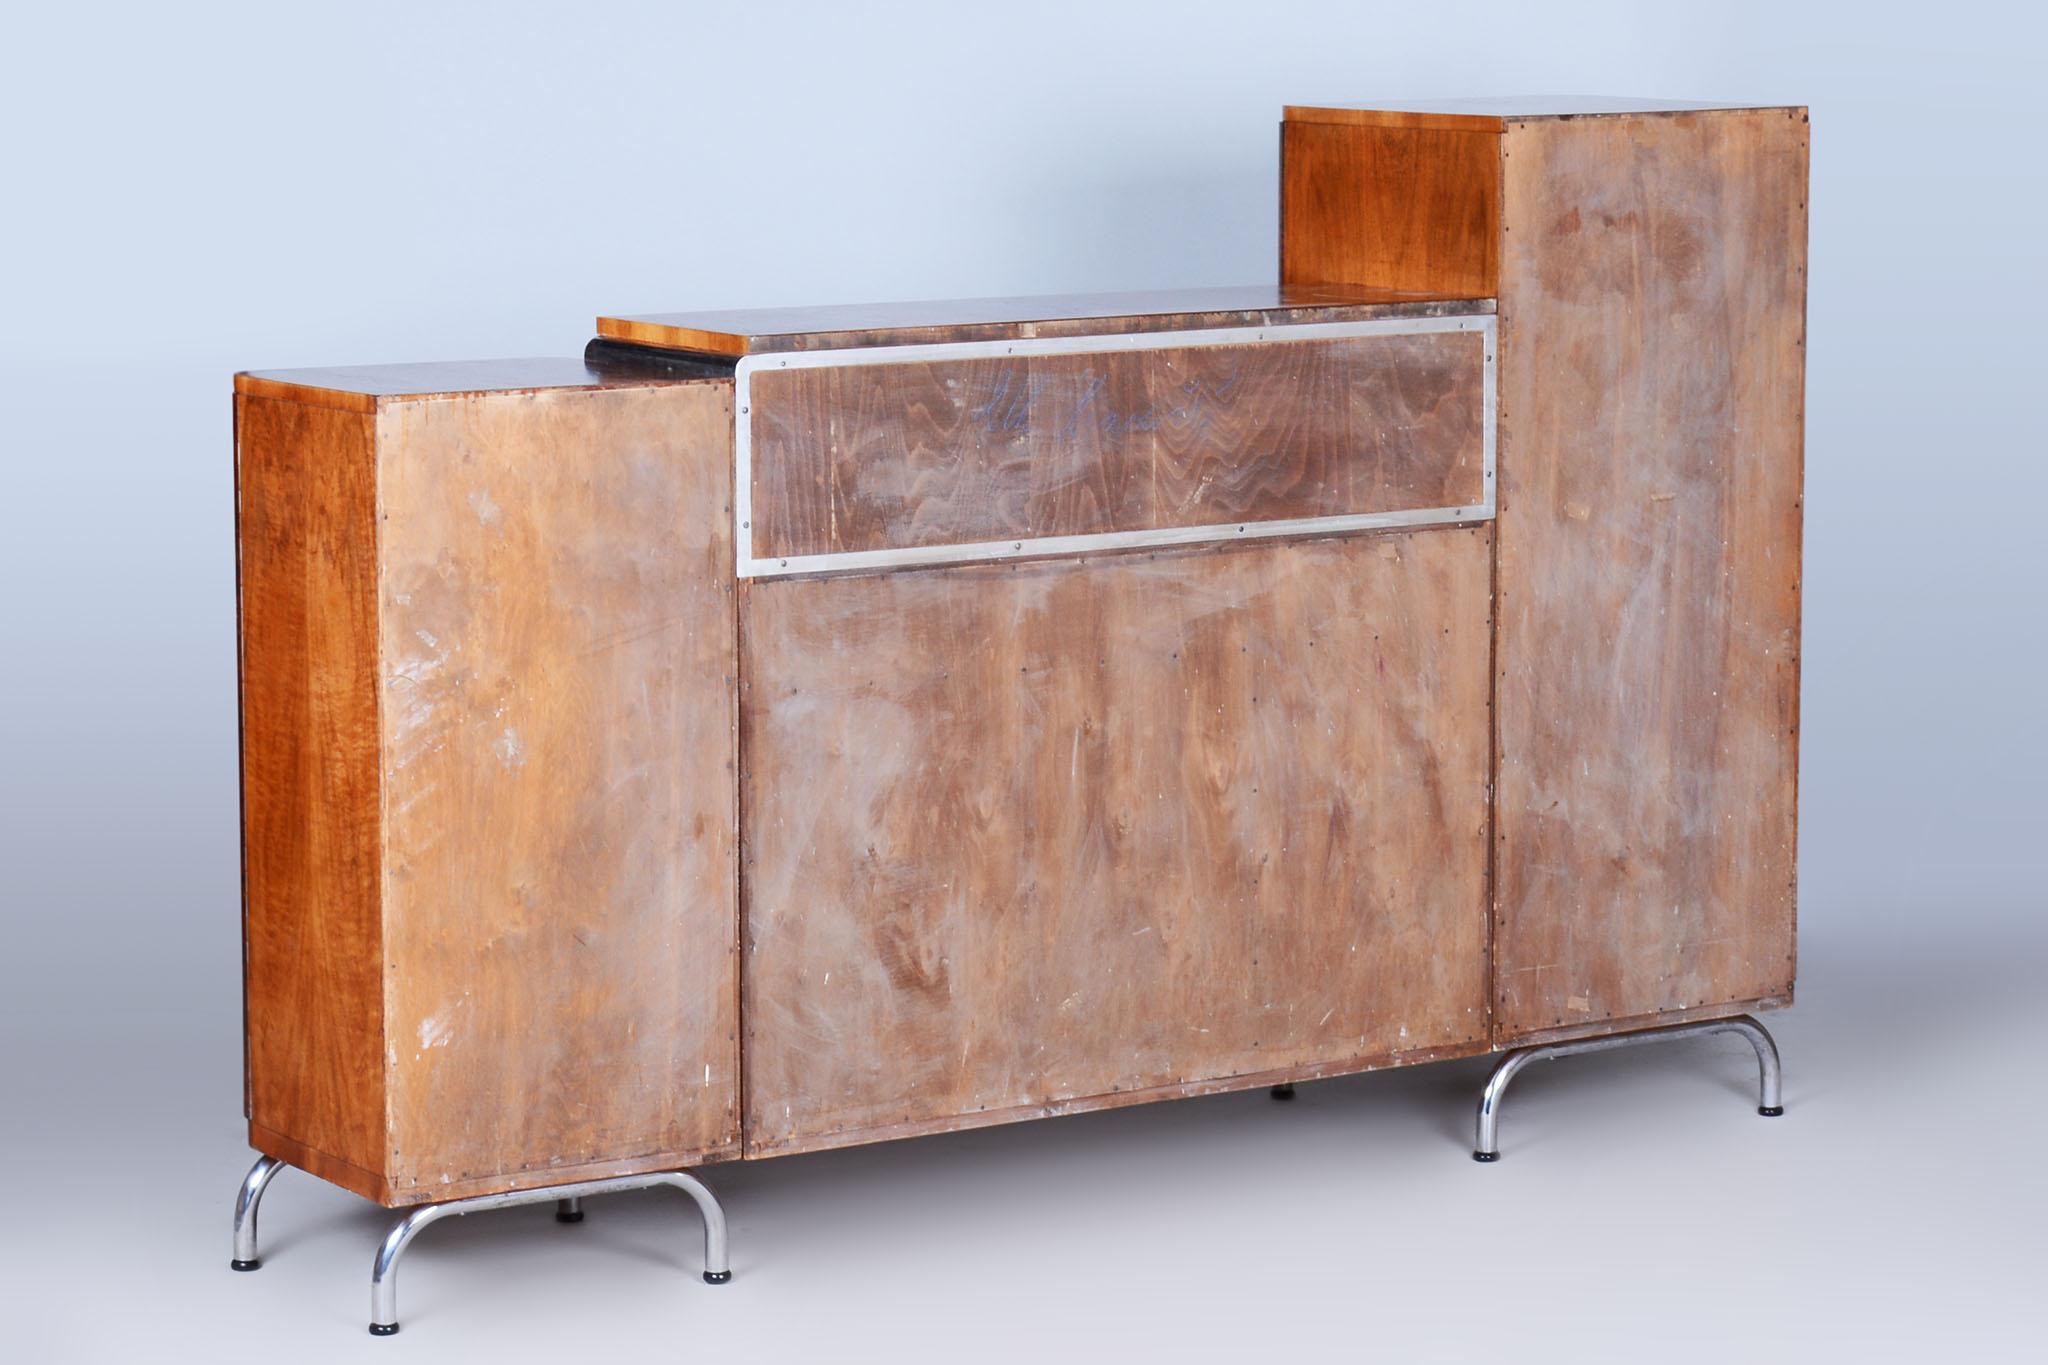 Walnut Bauhaus sideboard by Robert Slezak. 

Source: Czechia (Czechoslovakia)
Period: 1930-1939
Material: Chrome-Plated Steel, Walnut, Glass
Number of drawers: 3

Revived polish.
The chrome parts have been cleaned and professionally